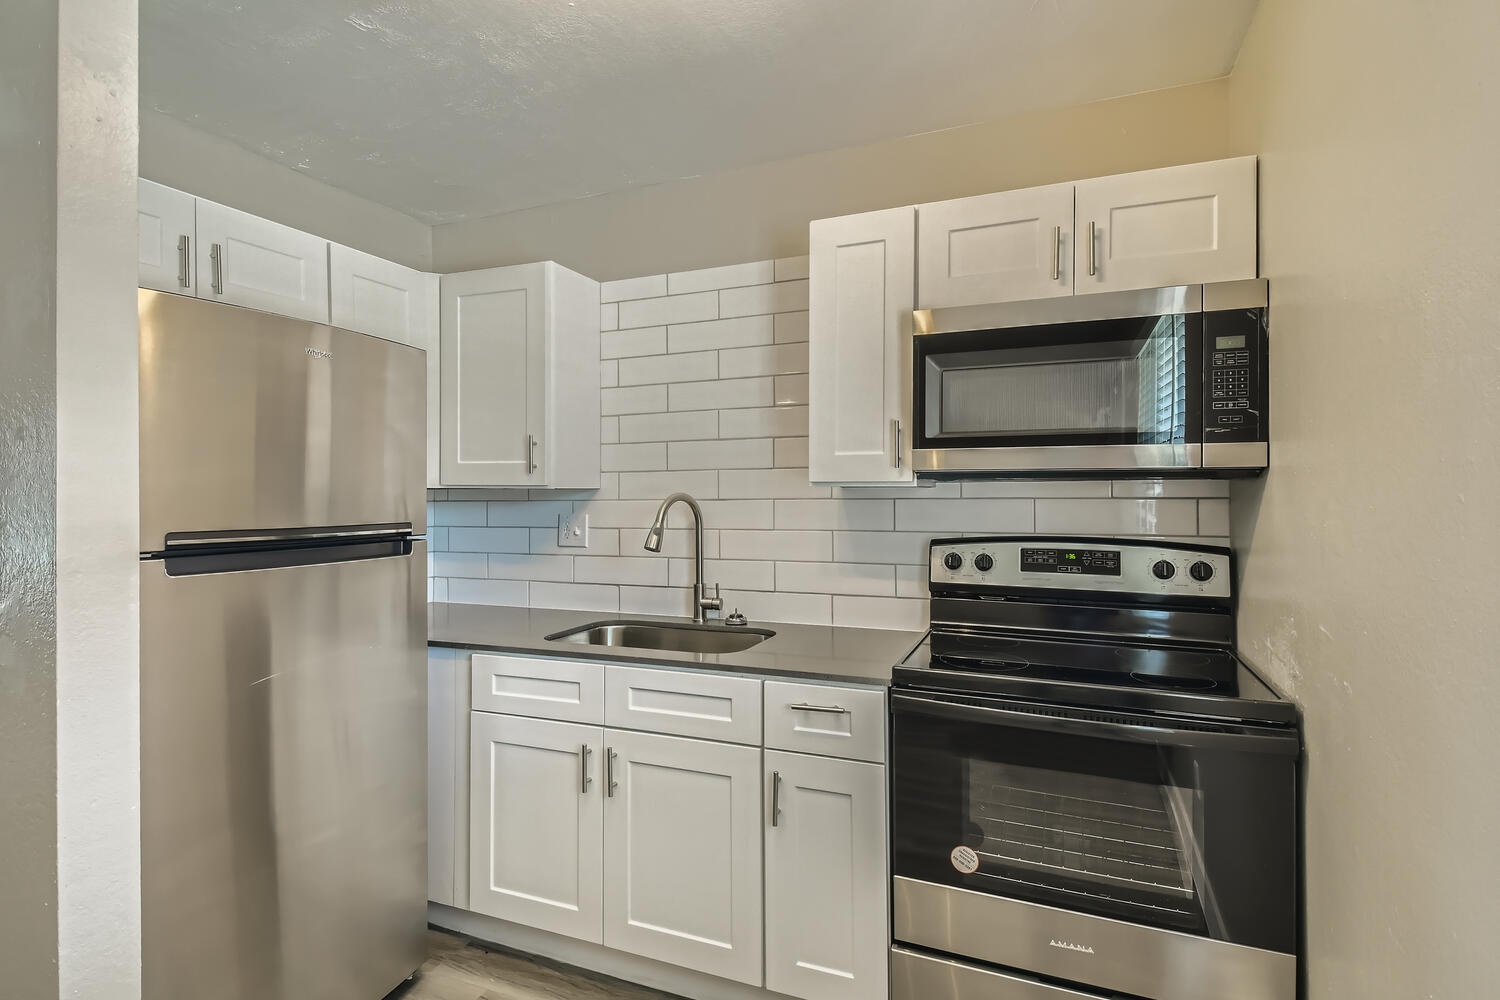 A small kitchen with grey quartz countertops and stainless steel appliances at Rise at the Palms.